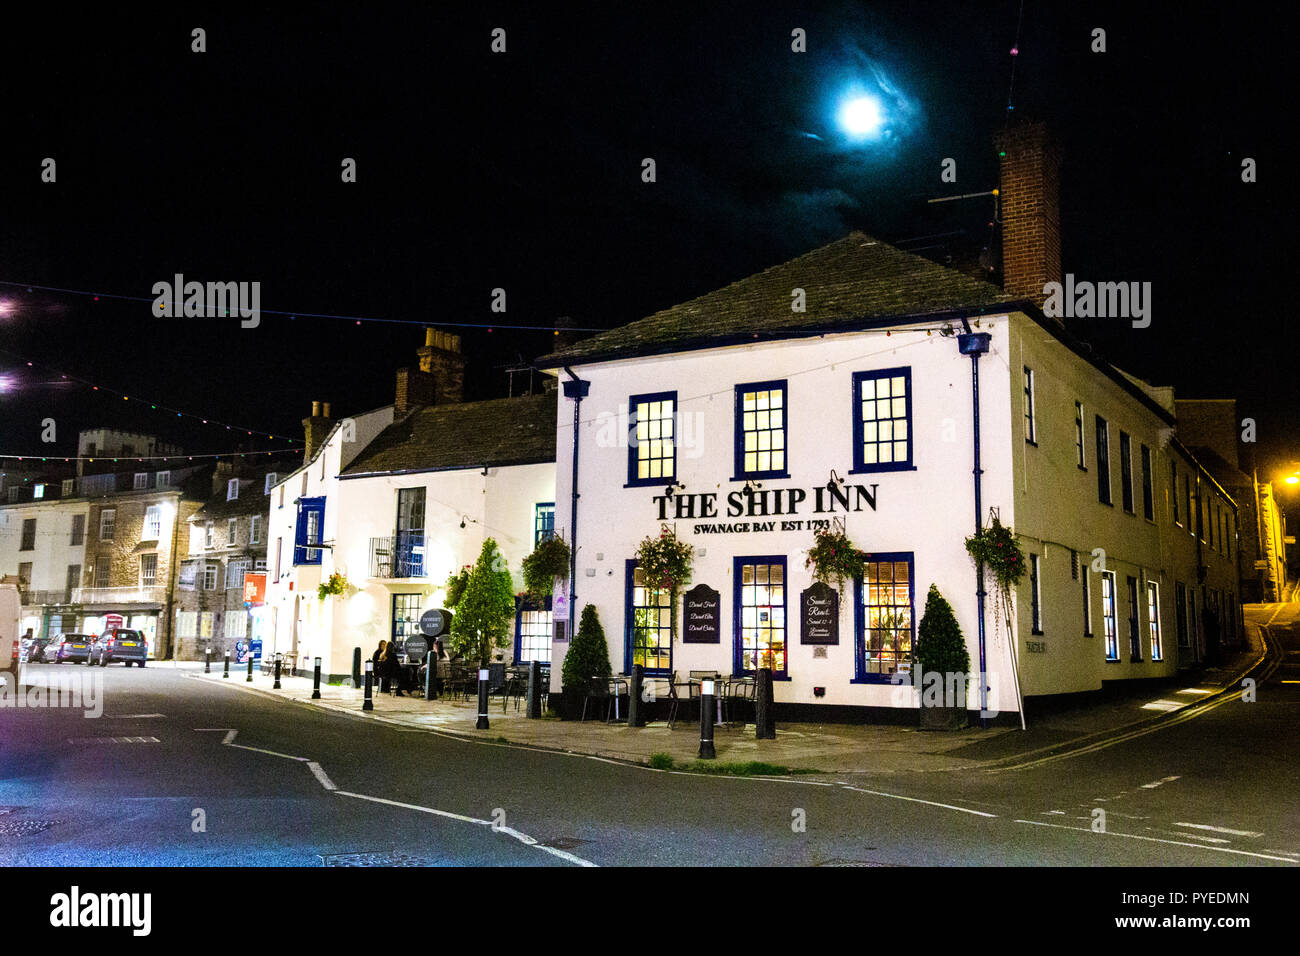 The Ship Inn and a street at night time in Swanage, Jurassic Coast, UK Stock Photo